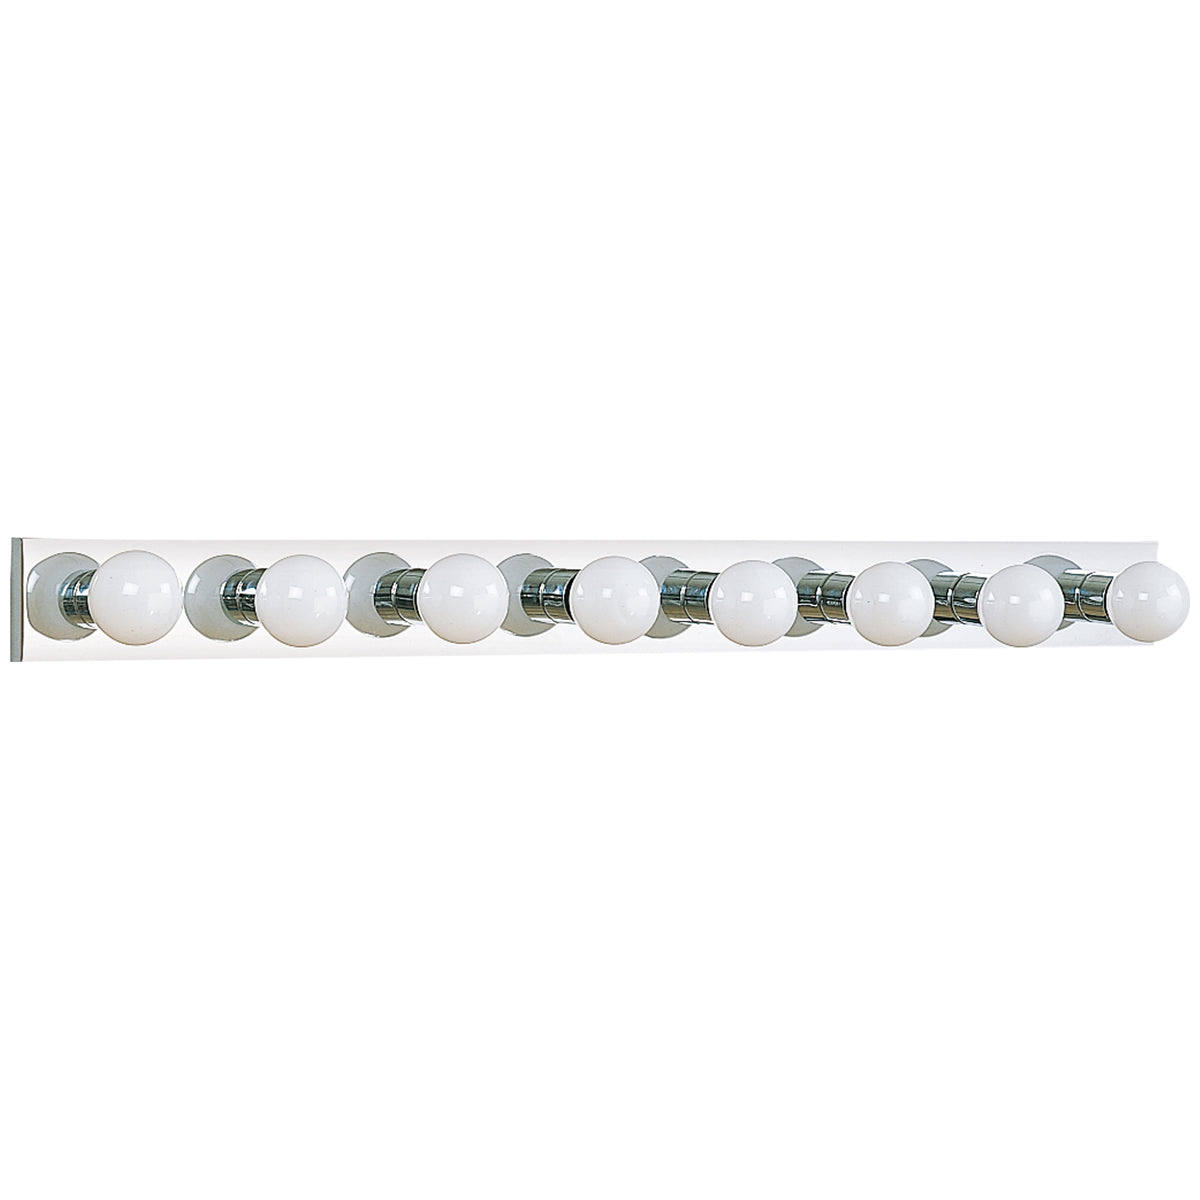 Sea Gull Lighting Center Stage 8-Light Wall/Bath Sconce without Bulb